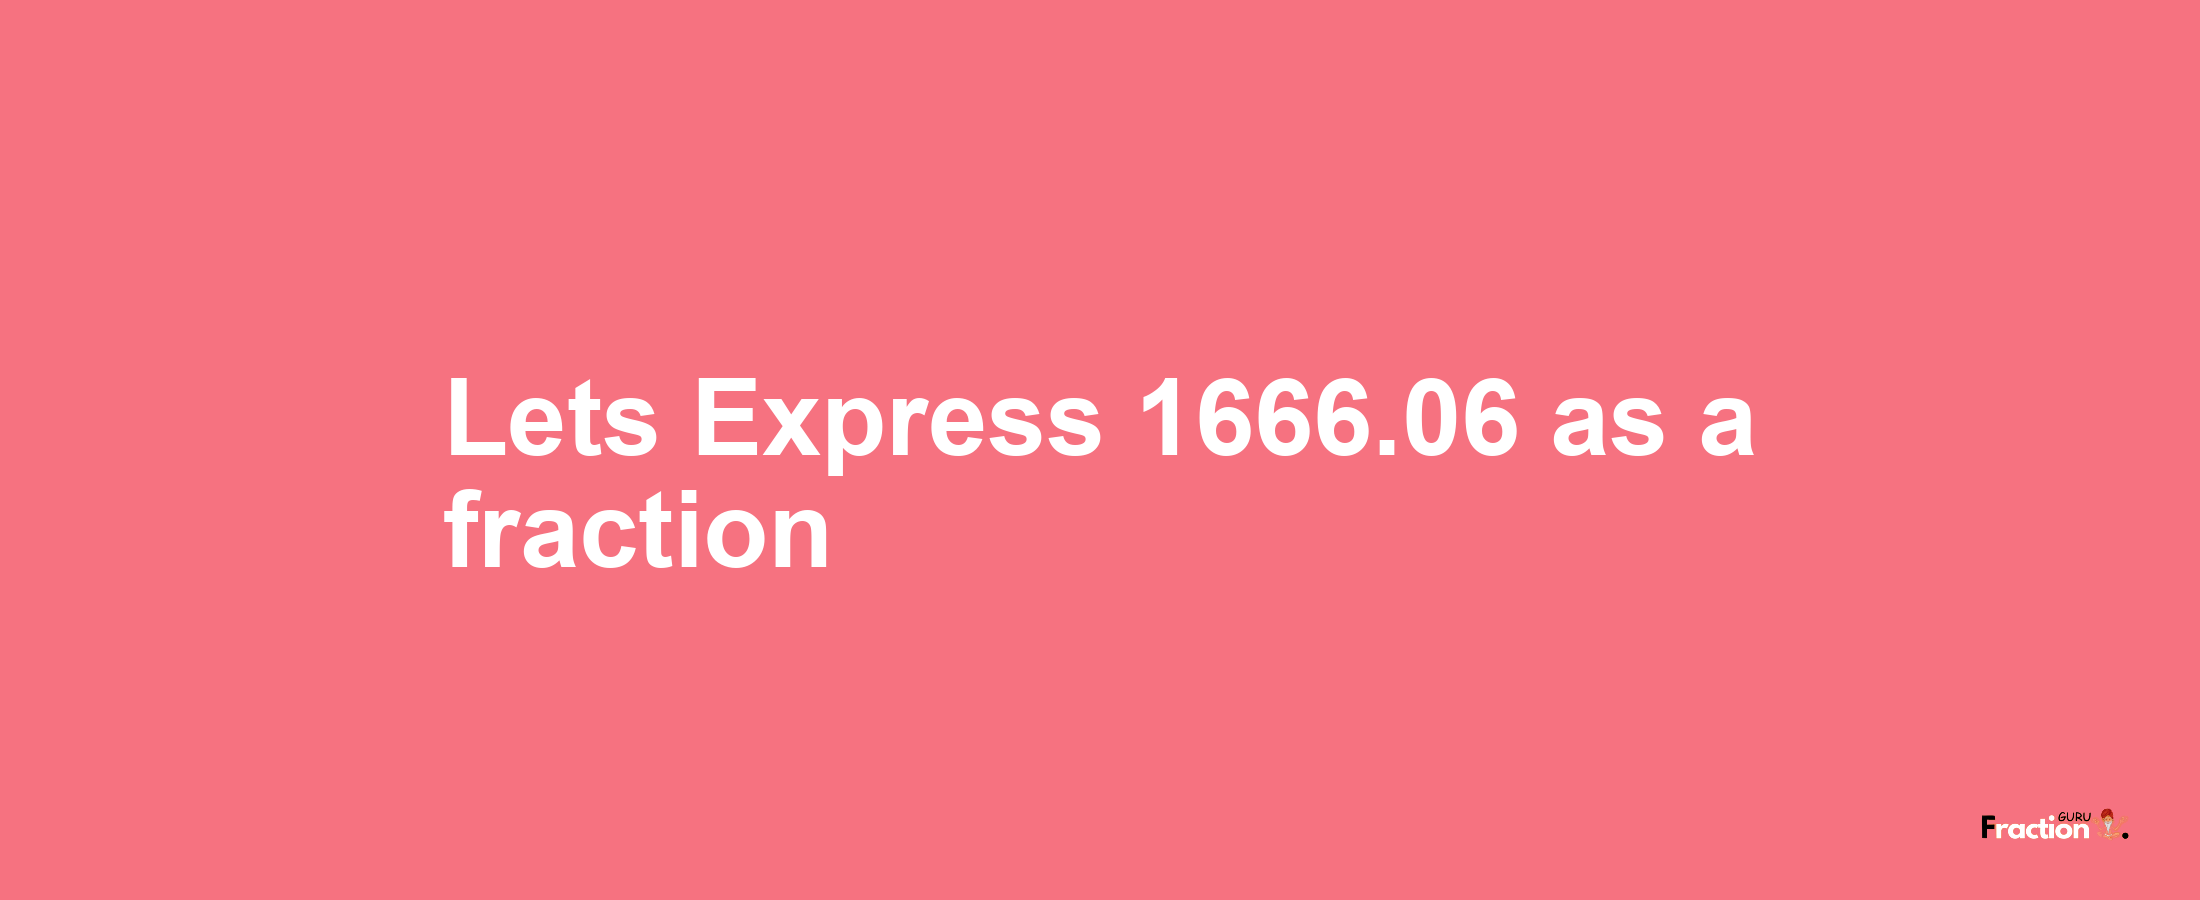 Lets Express 1666.06 as afraction